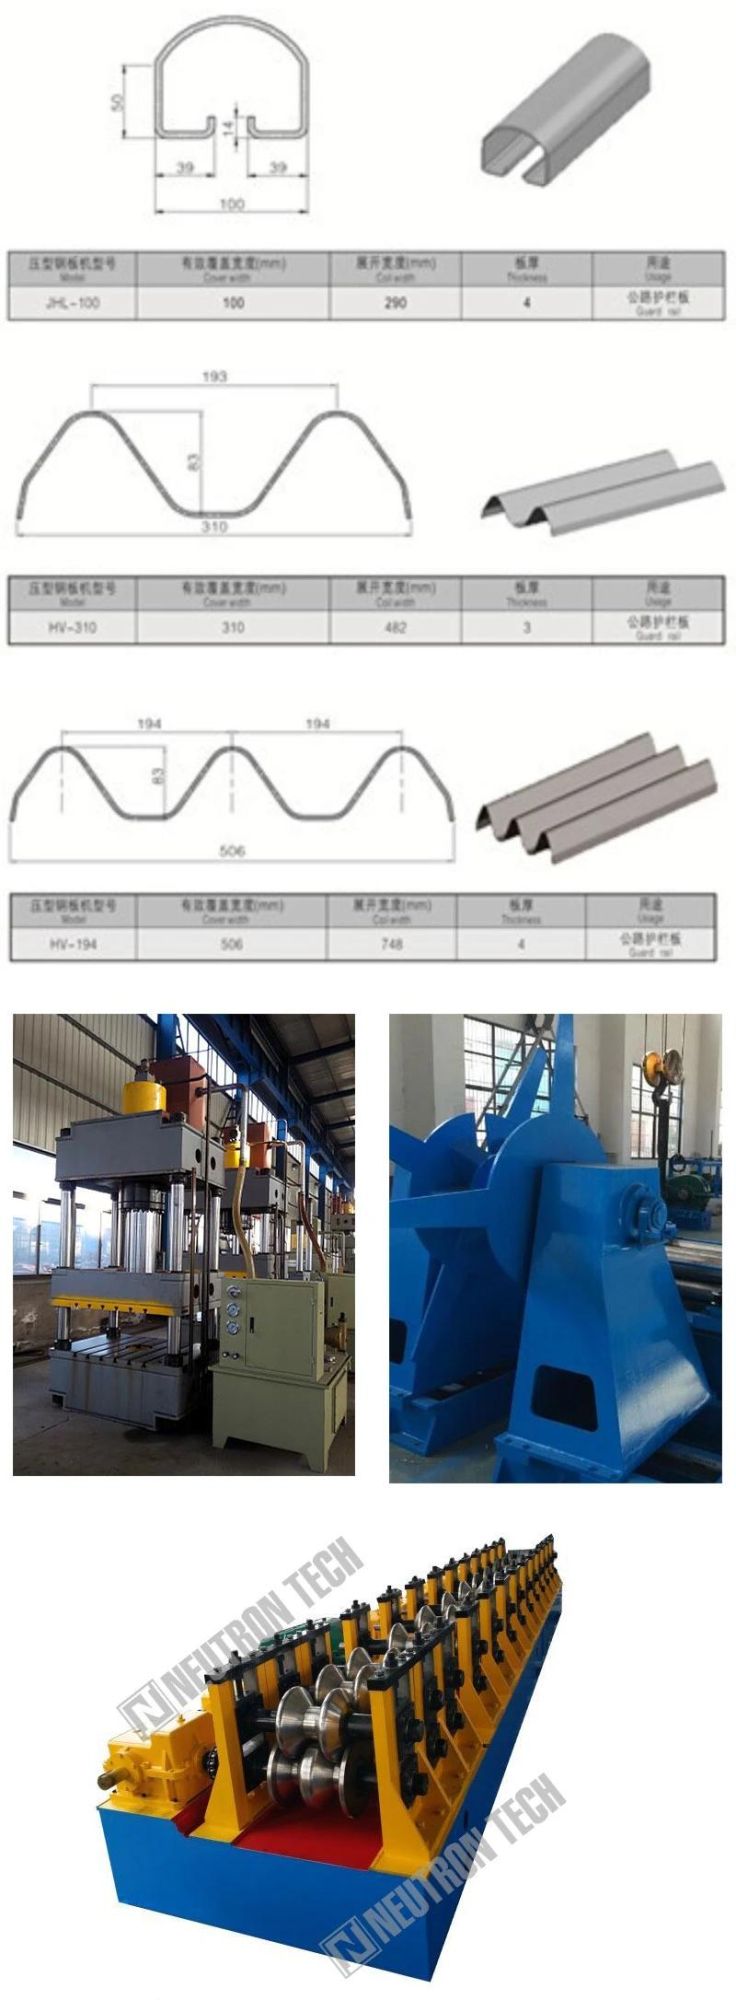 CNC Automatic Highway Guardrail Expressway Guard Rail Roll Forming Machine